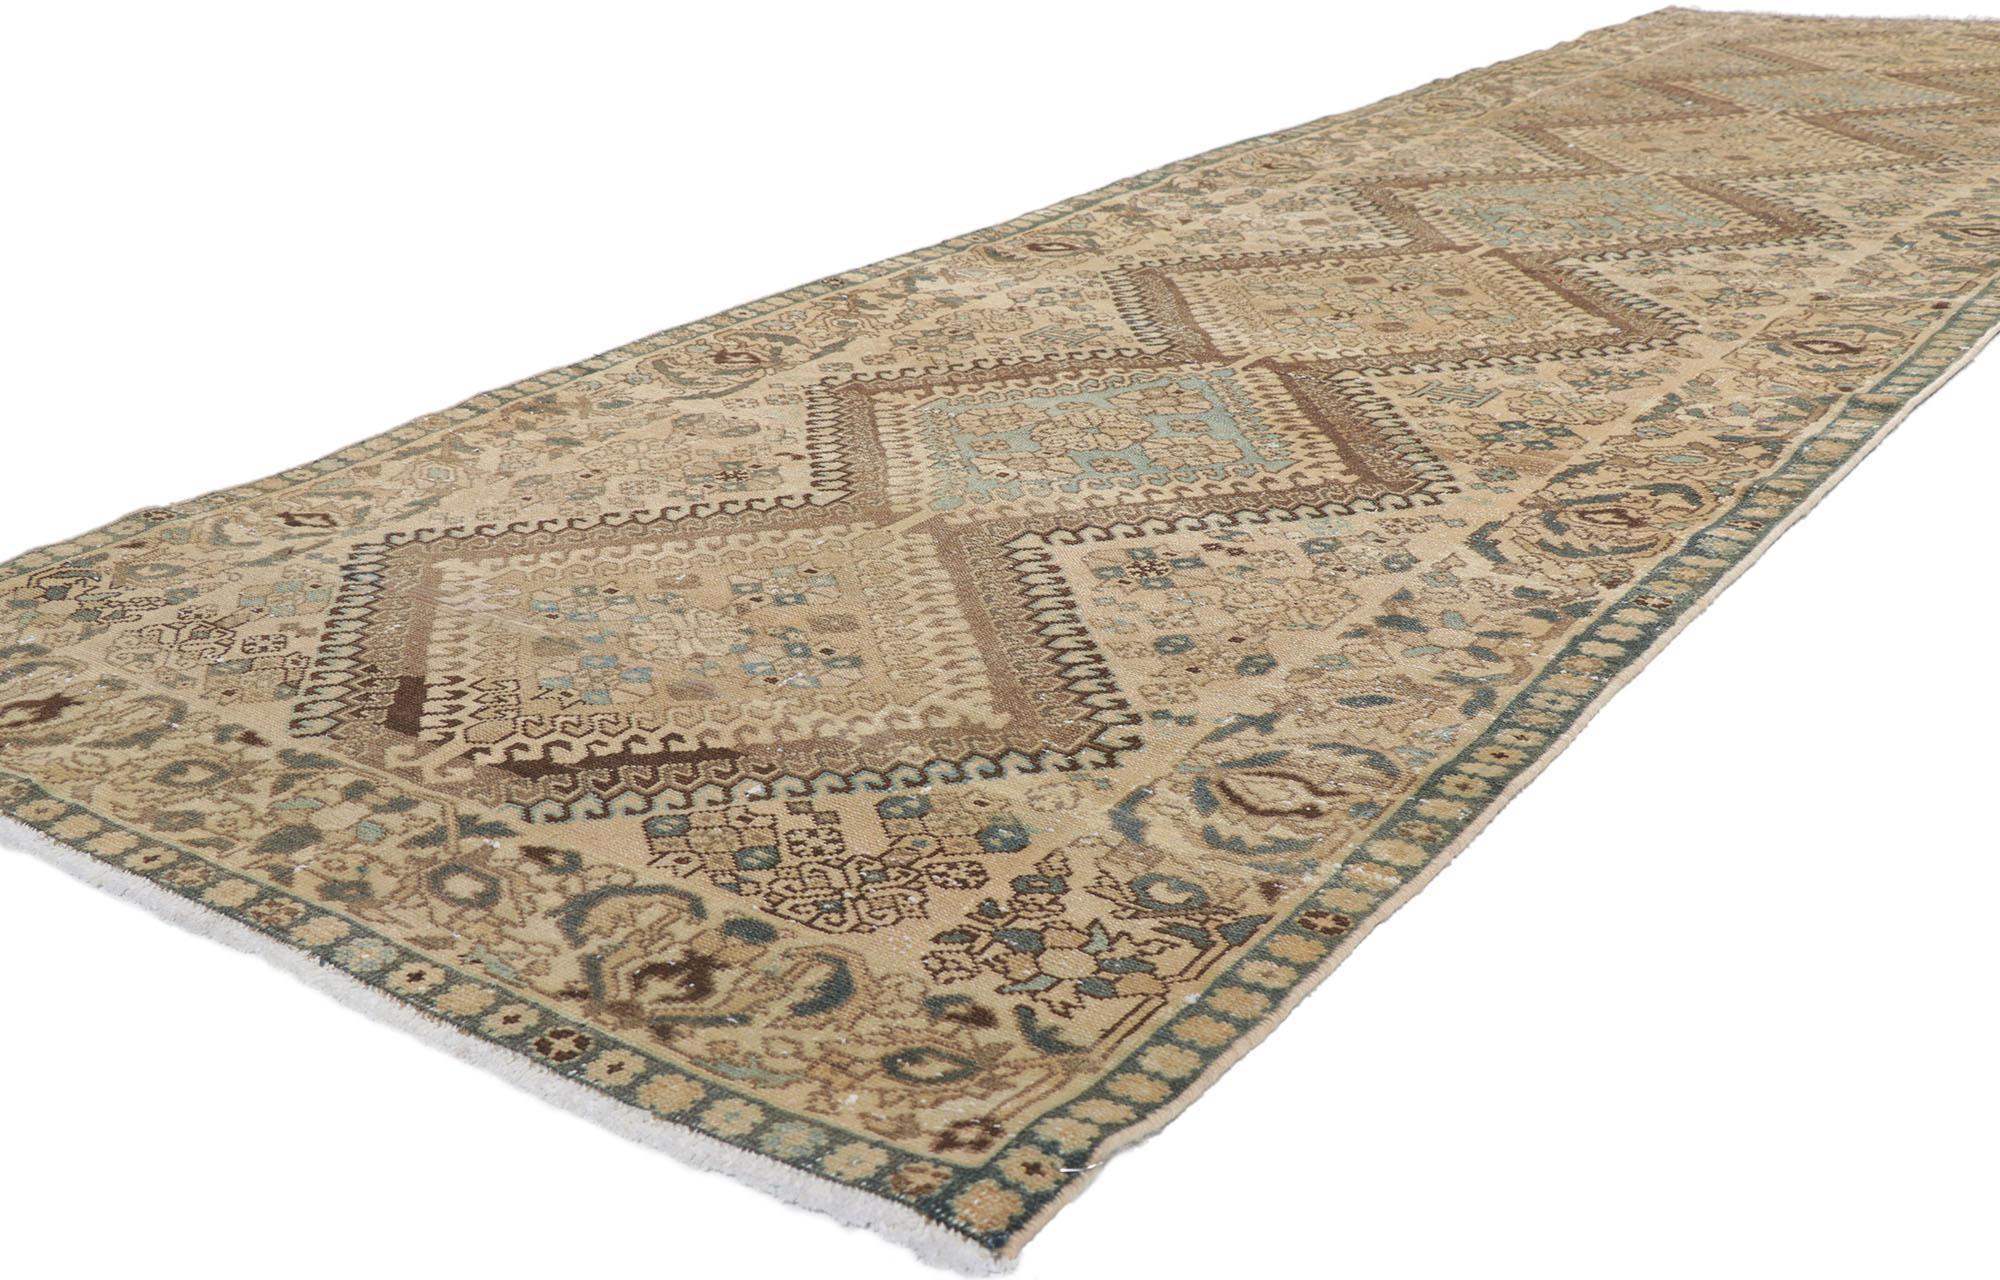 61026 Vintage Persian Hamadan Rug, 03'10 x 12'07. In the whimsical dance of nomadic allure and rustic finesse, say hello to this distressed antique Persian Hamadan rug runner—a floor whisperer of sorts, regaling tales of tribal charisma and earthy